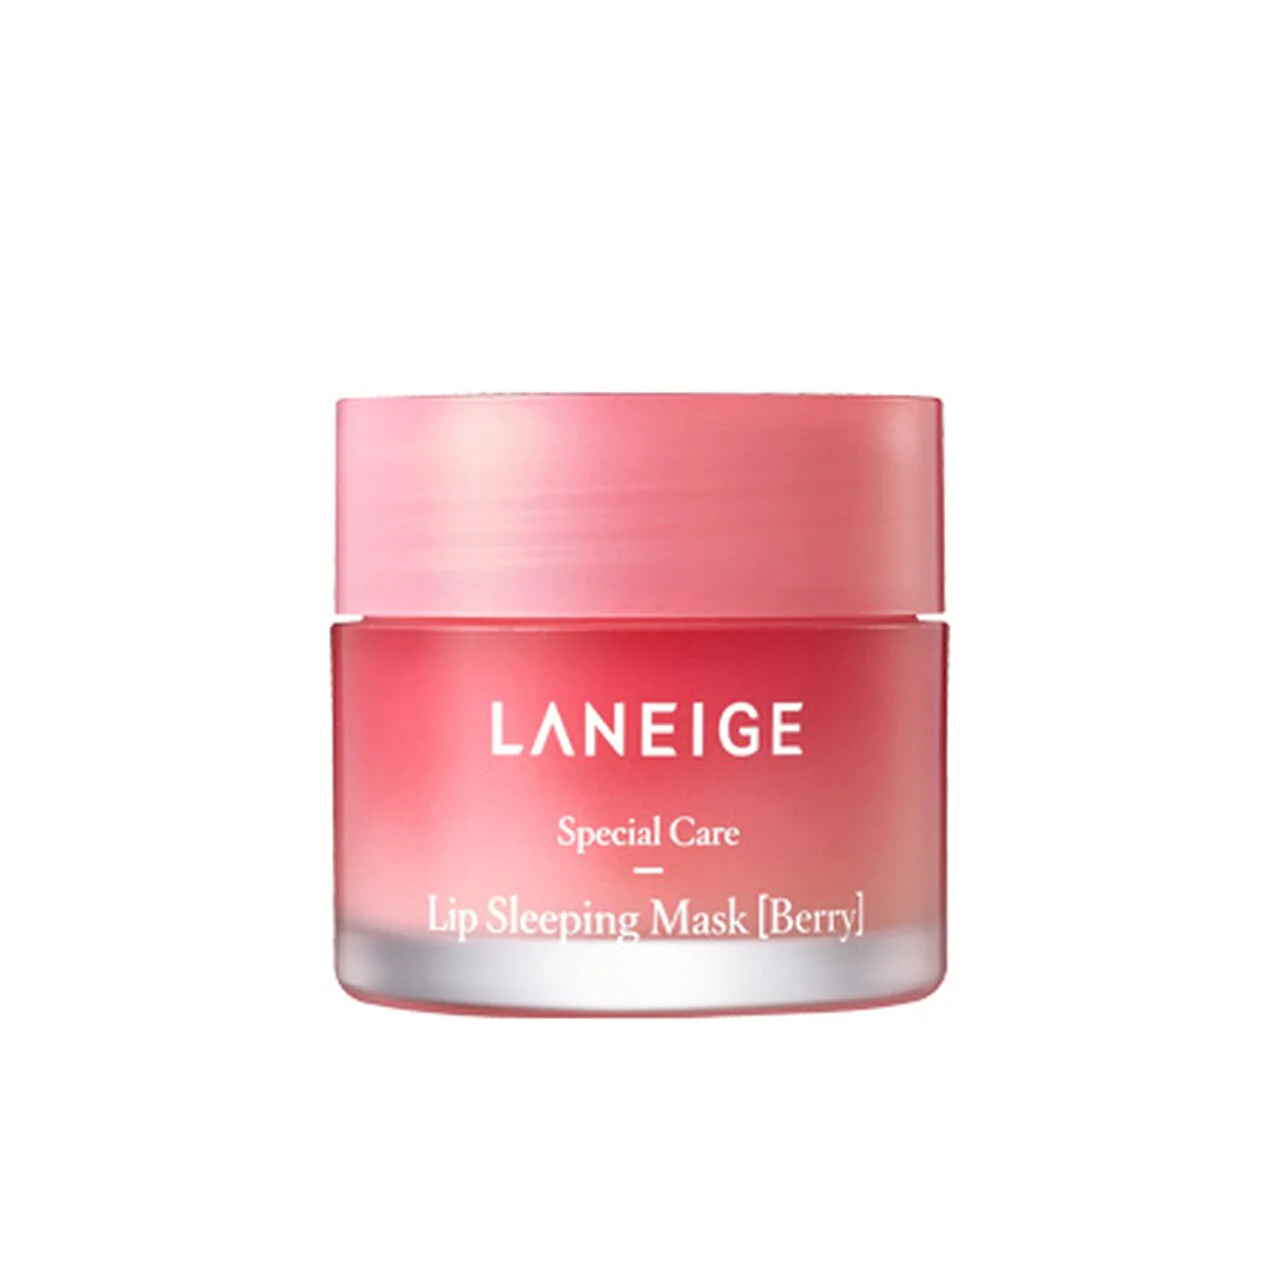 Lip Sleeping Mask by Laneige, an overnight lip care product.